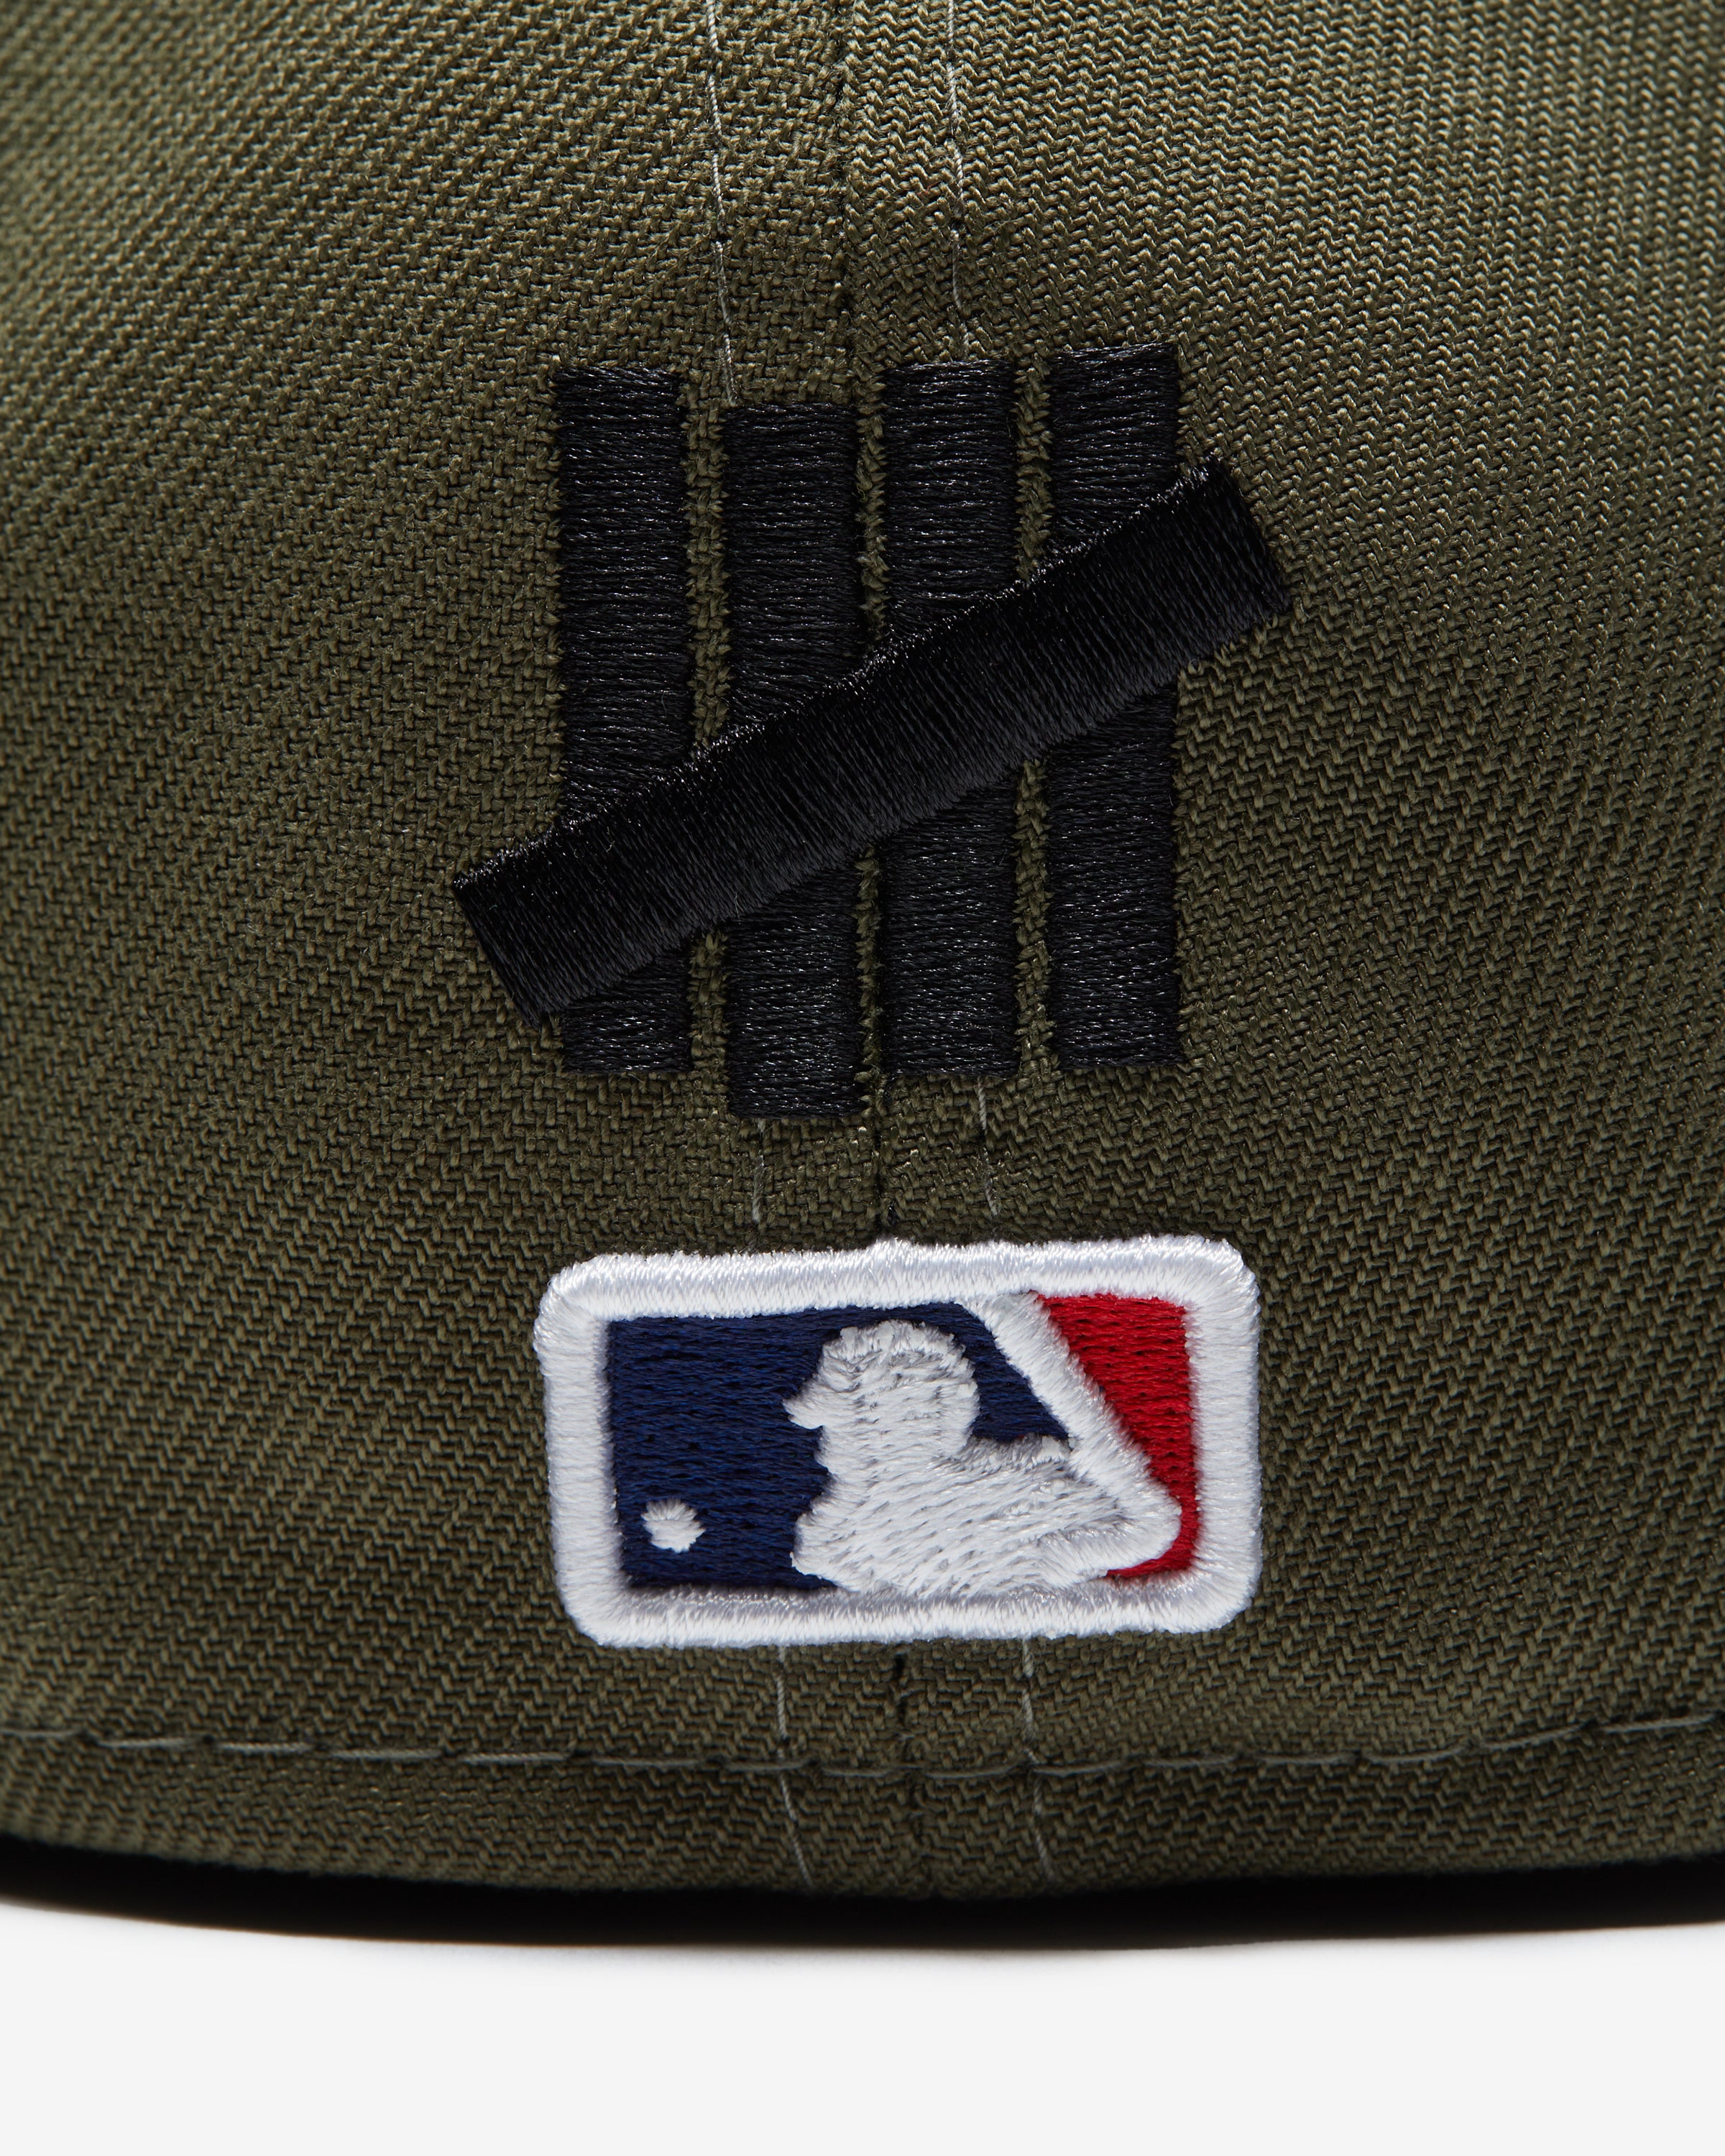 New York Yankees New Era x Undefeated Pullover Hoodie - Olive